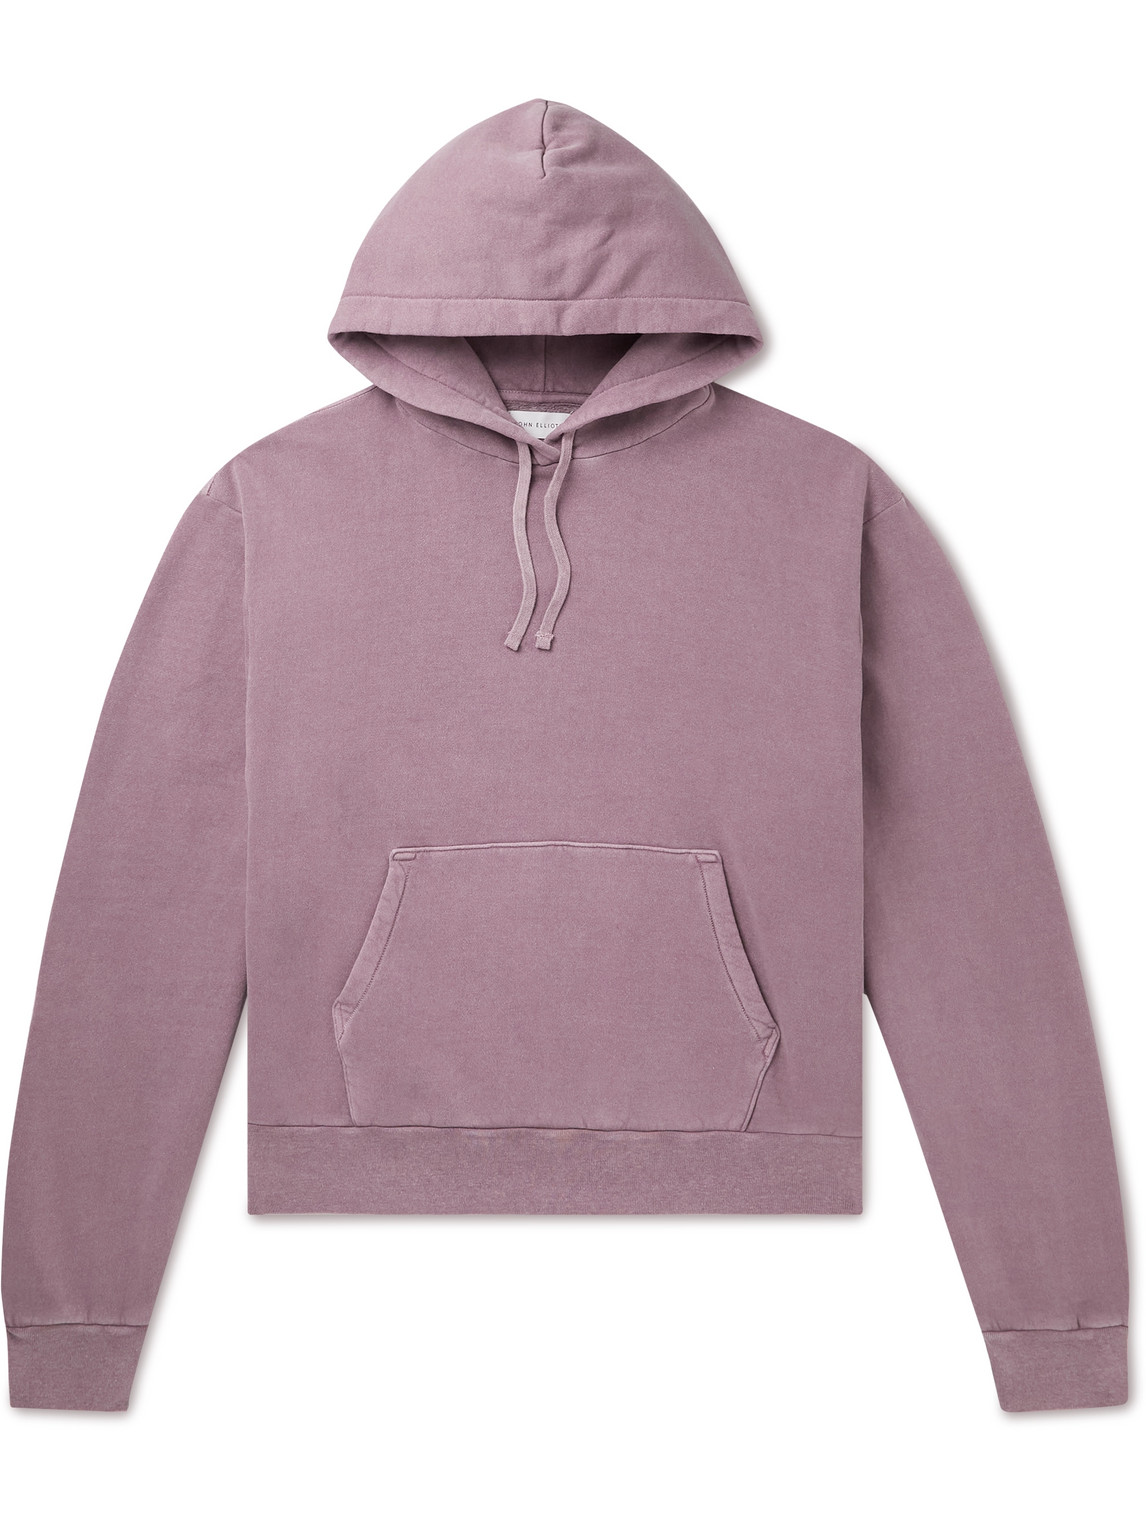 Interval Garment-Dyed Cotton-Jersey Hoodie